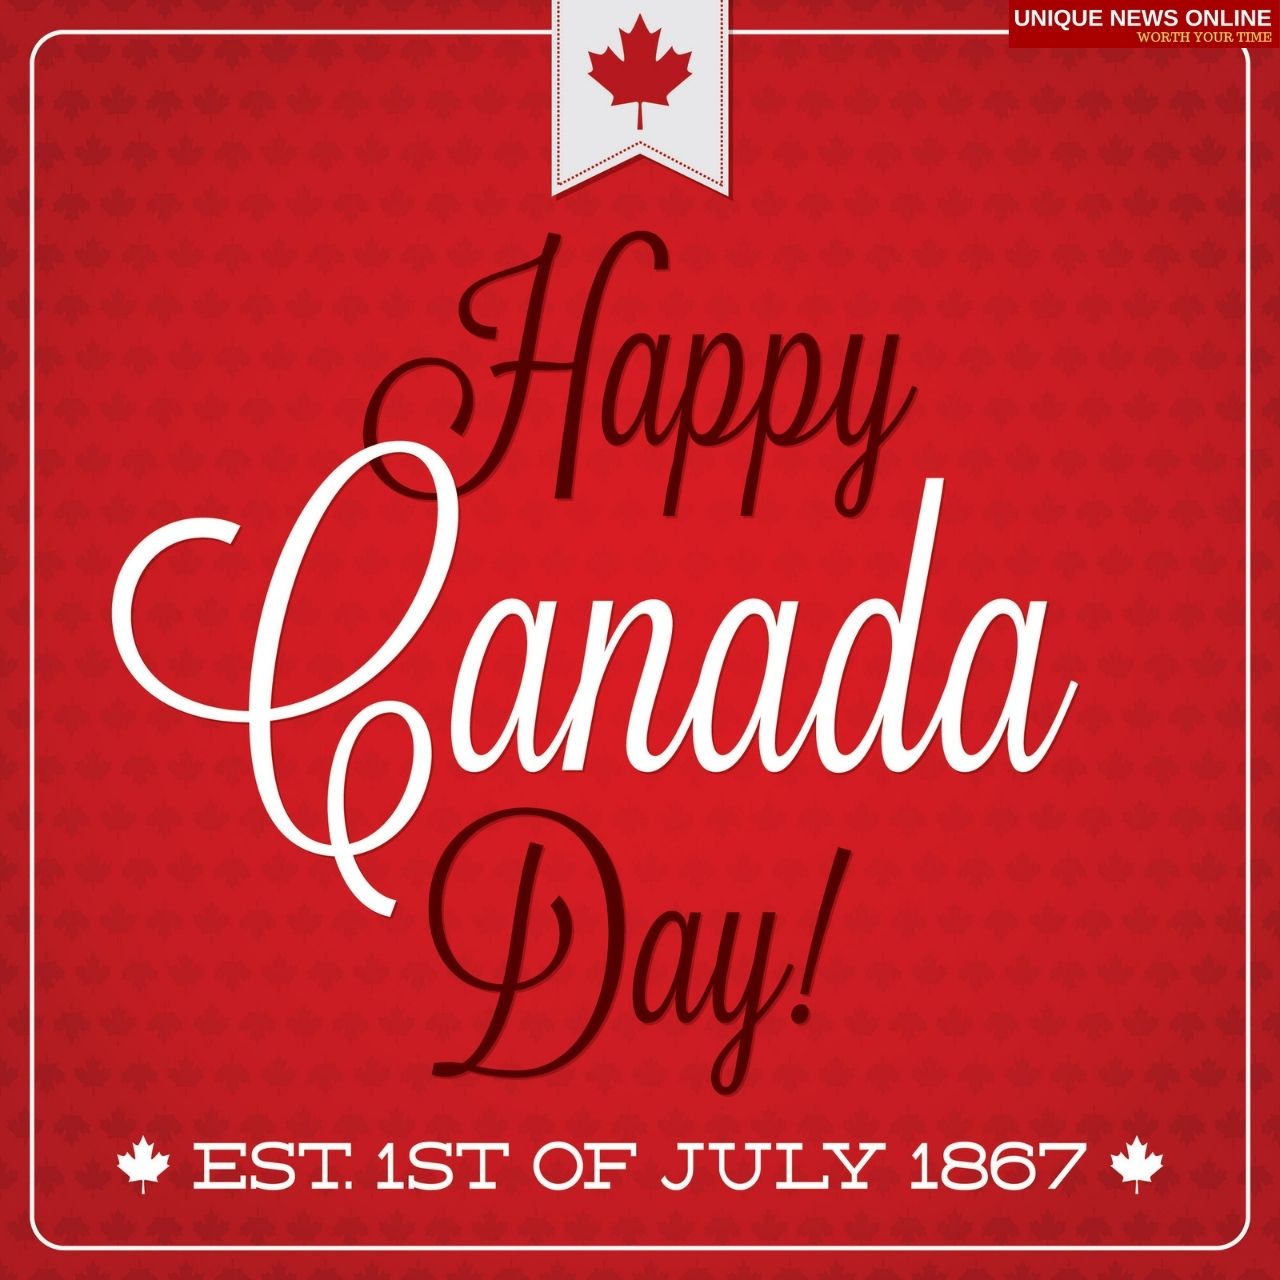 Happy Canada Day 2021 Images, Wishes, and Greetings: Messages, Wallpaper, Clipart, and Gifs to celebrate the reunion of Canada, Nova Scotia, and New Brunswick